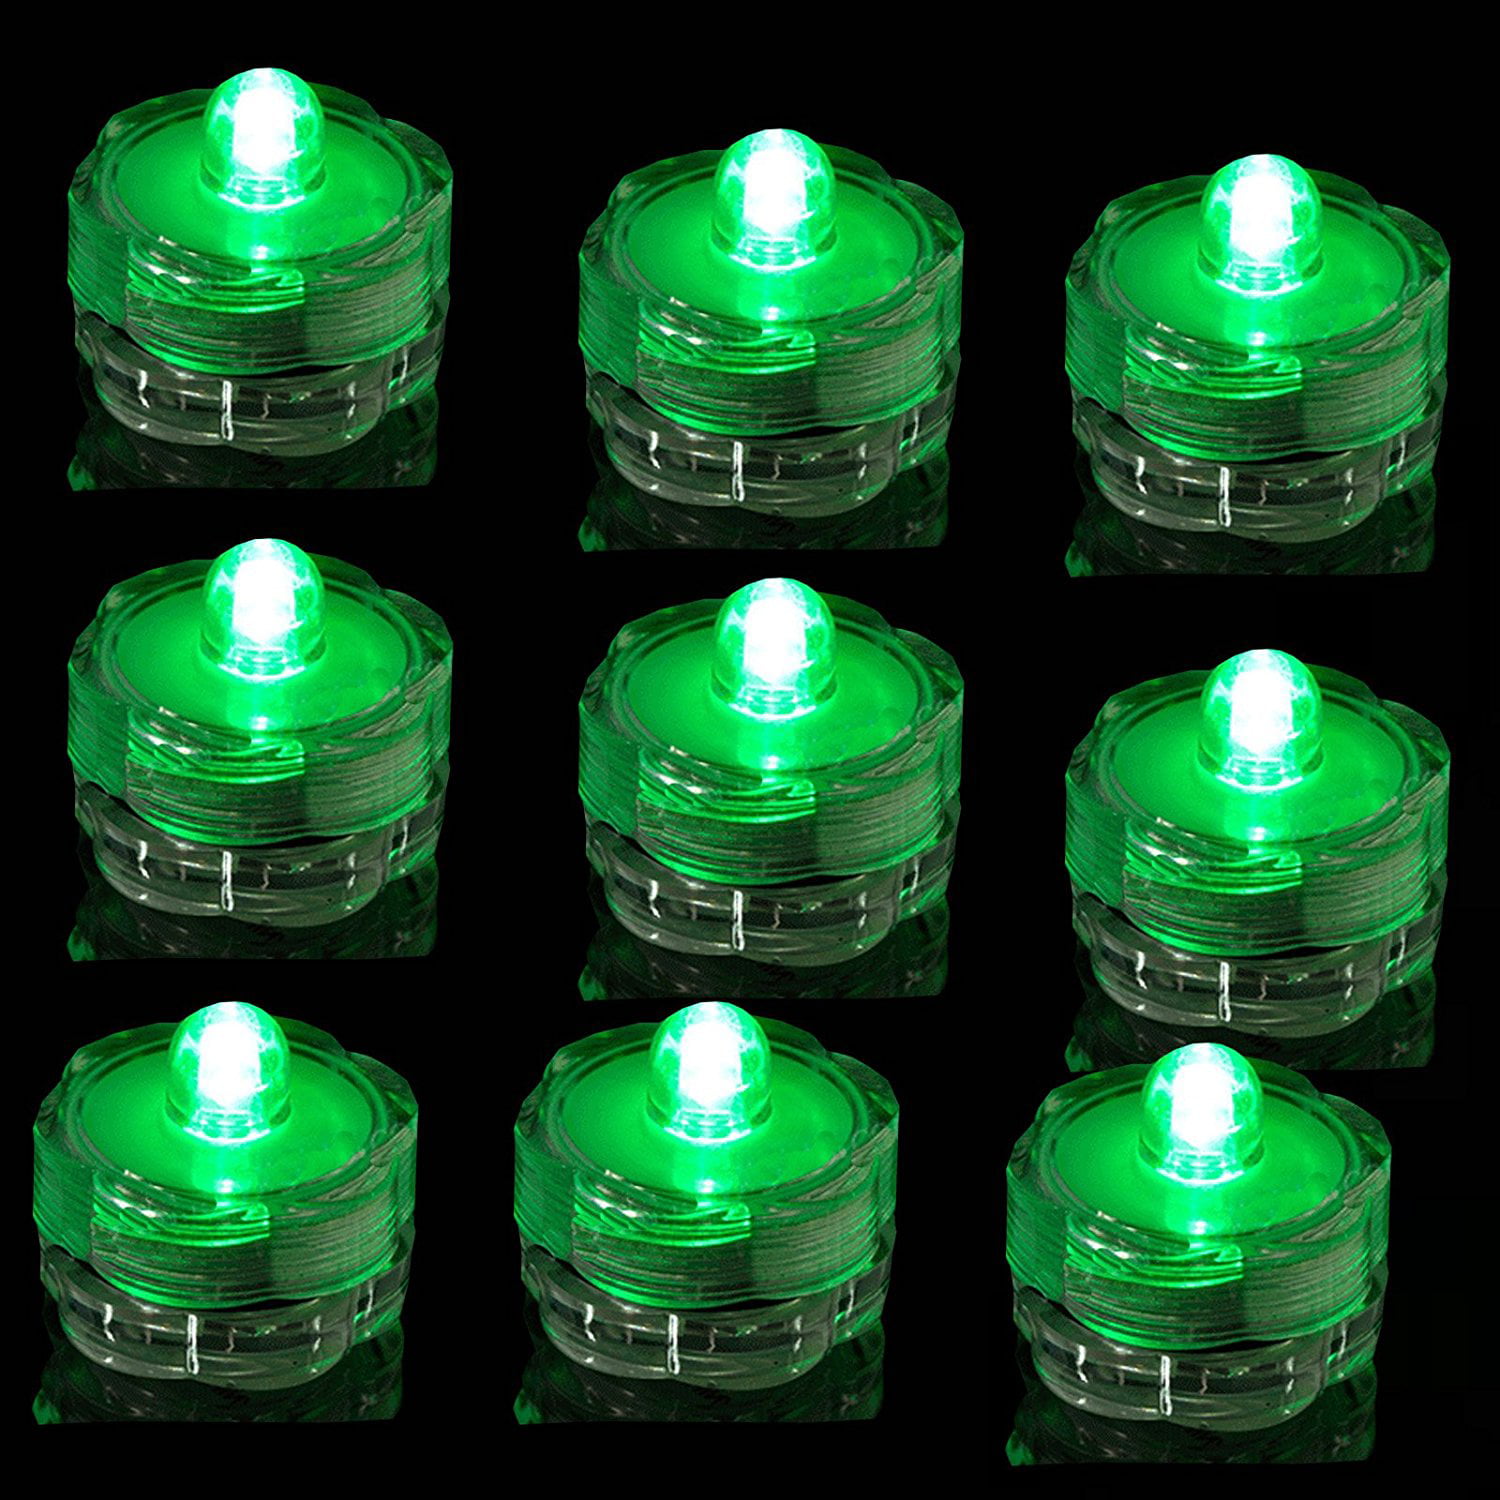 SUPER Bright LED Floral Tea Light Submersible Lights For Party Wedding  (Green, 30 Pack) By BcTlyInc Ship from US